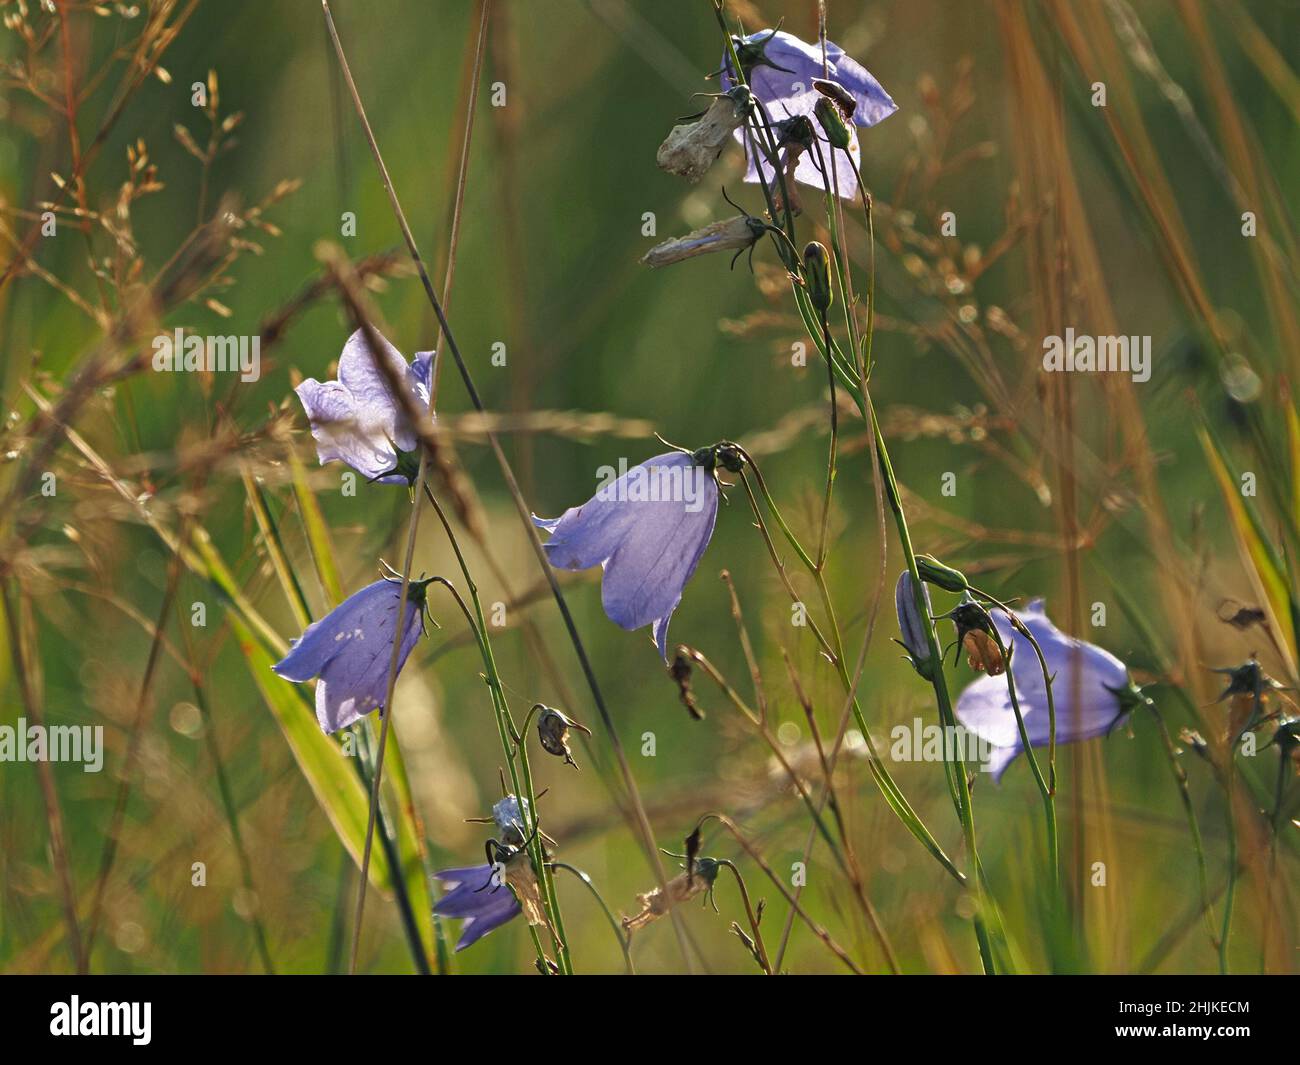 Golden grass seed-heads and pale blue flowers of Harebell (Campanula rotundifolia) in Summer meadow Cumbria,England, UK Stock Photo